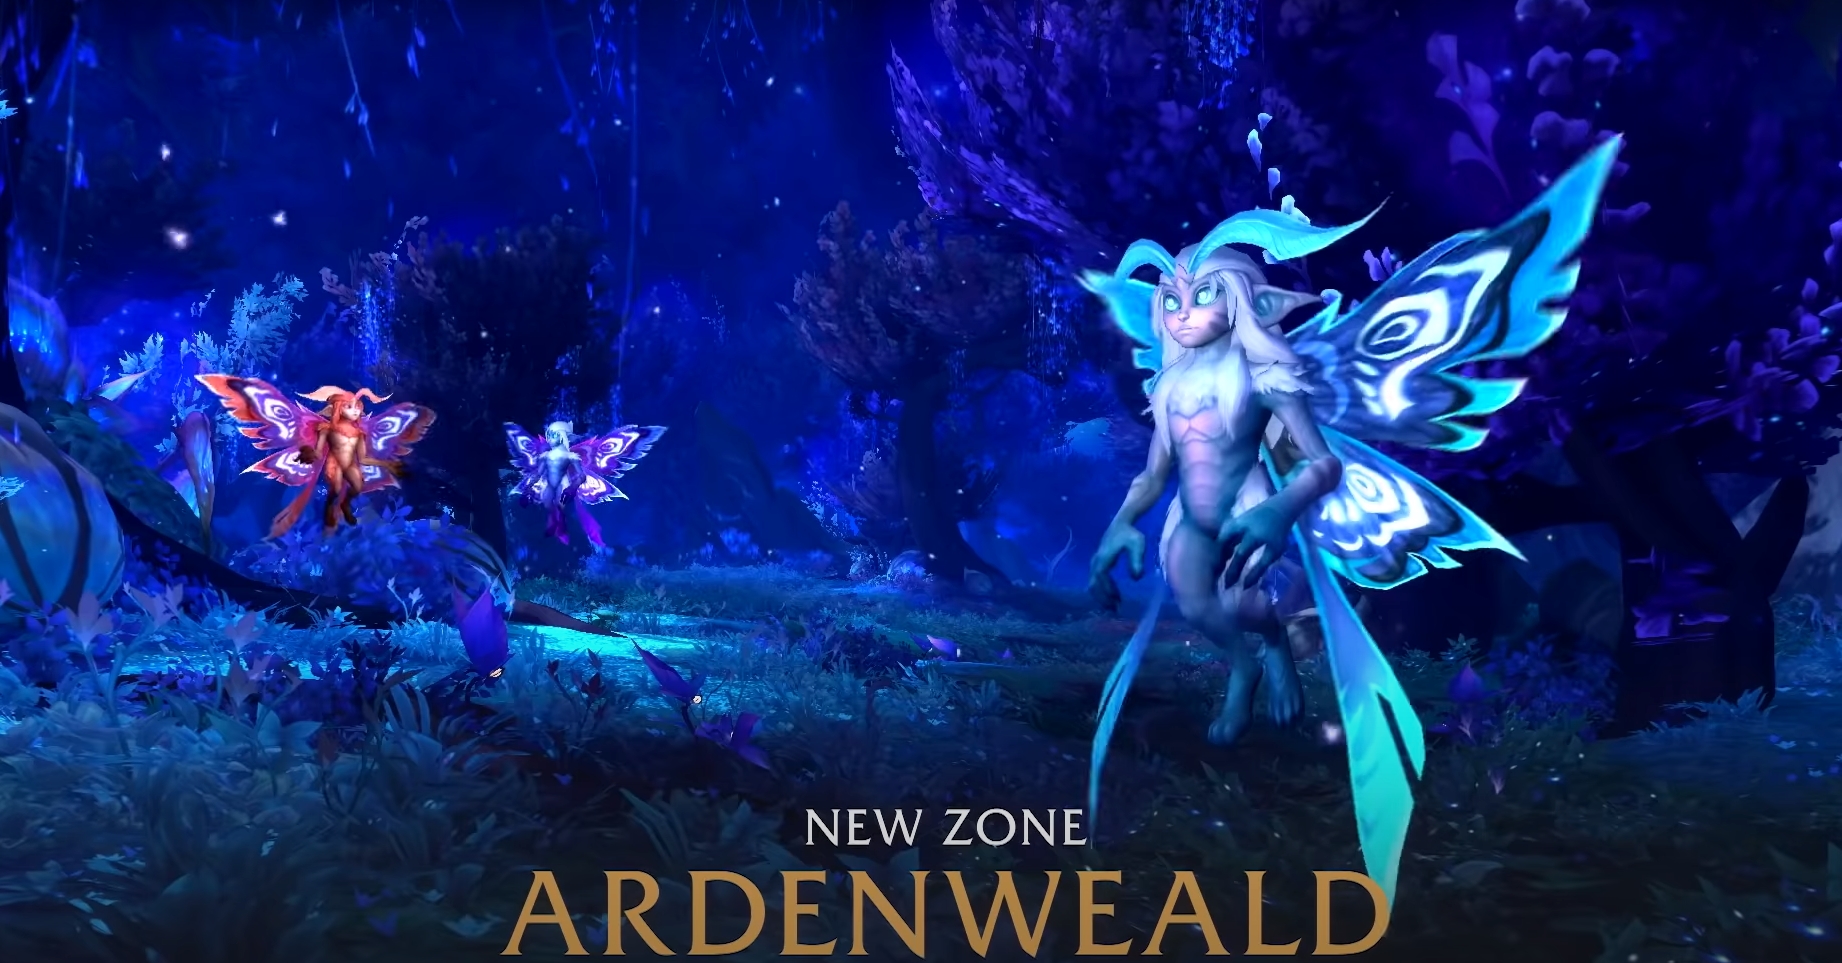 A Promotional Campaign Has Blizzard Granting A New Adorable Fae-Inspired Transmog Set To World Of Warcraft Subscribers